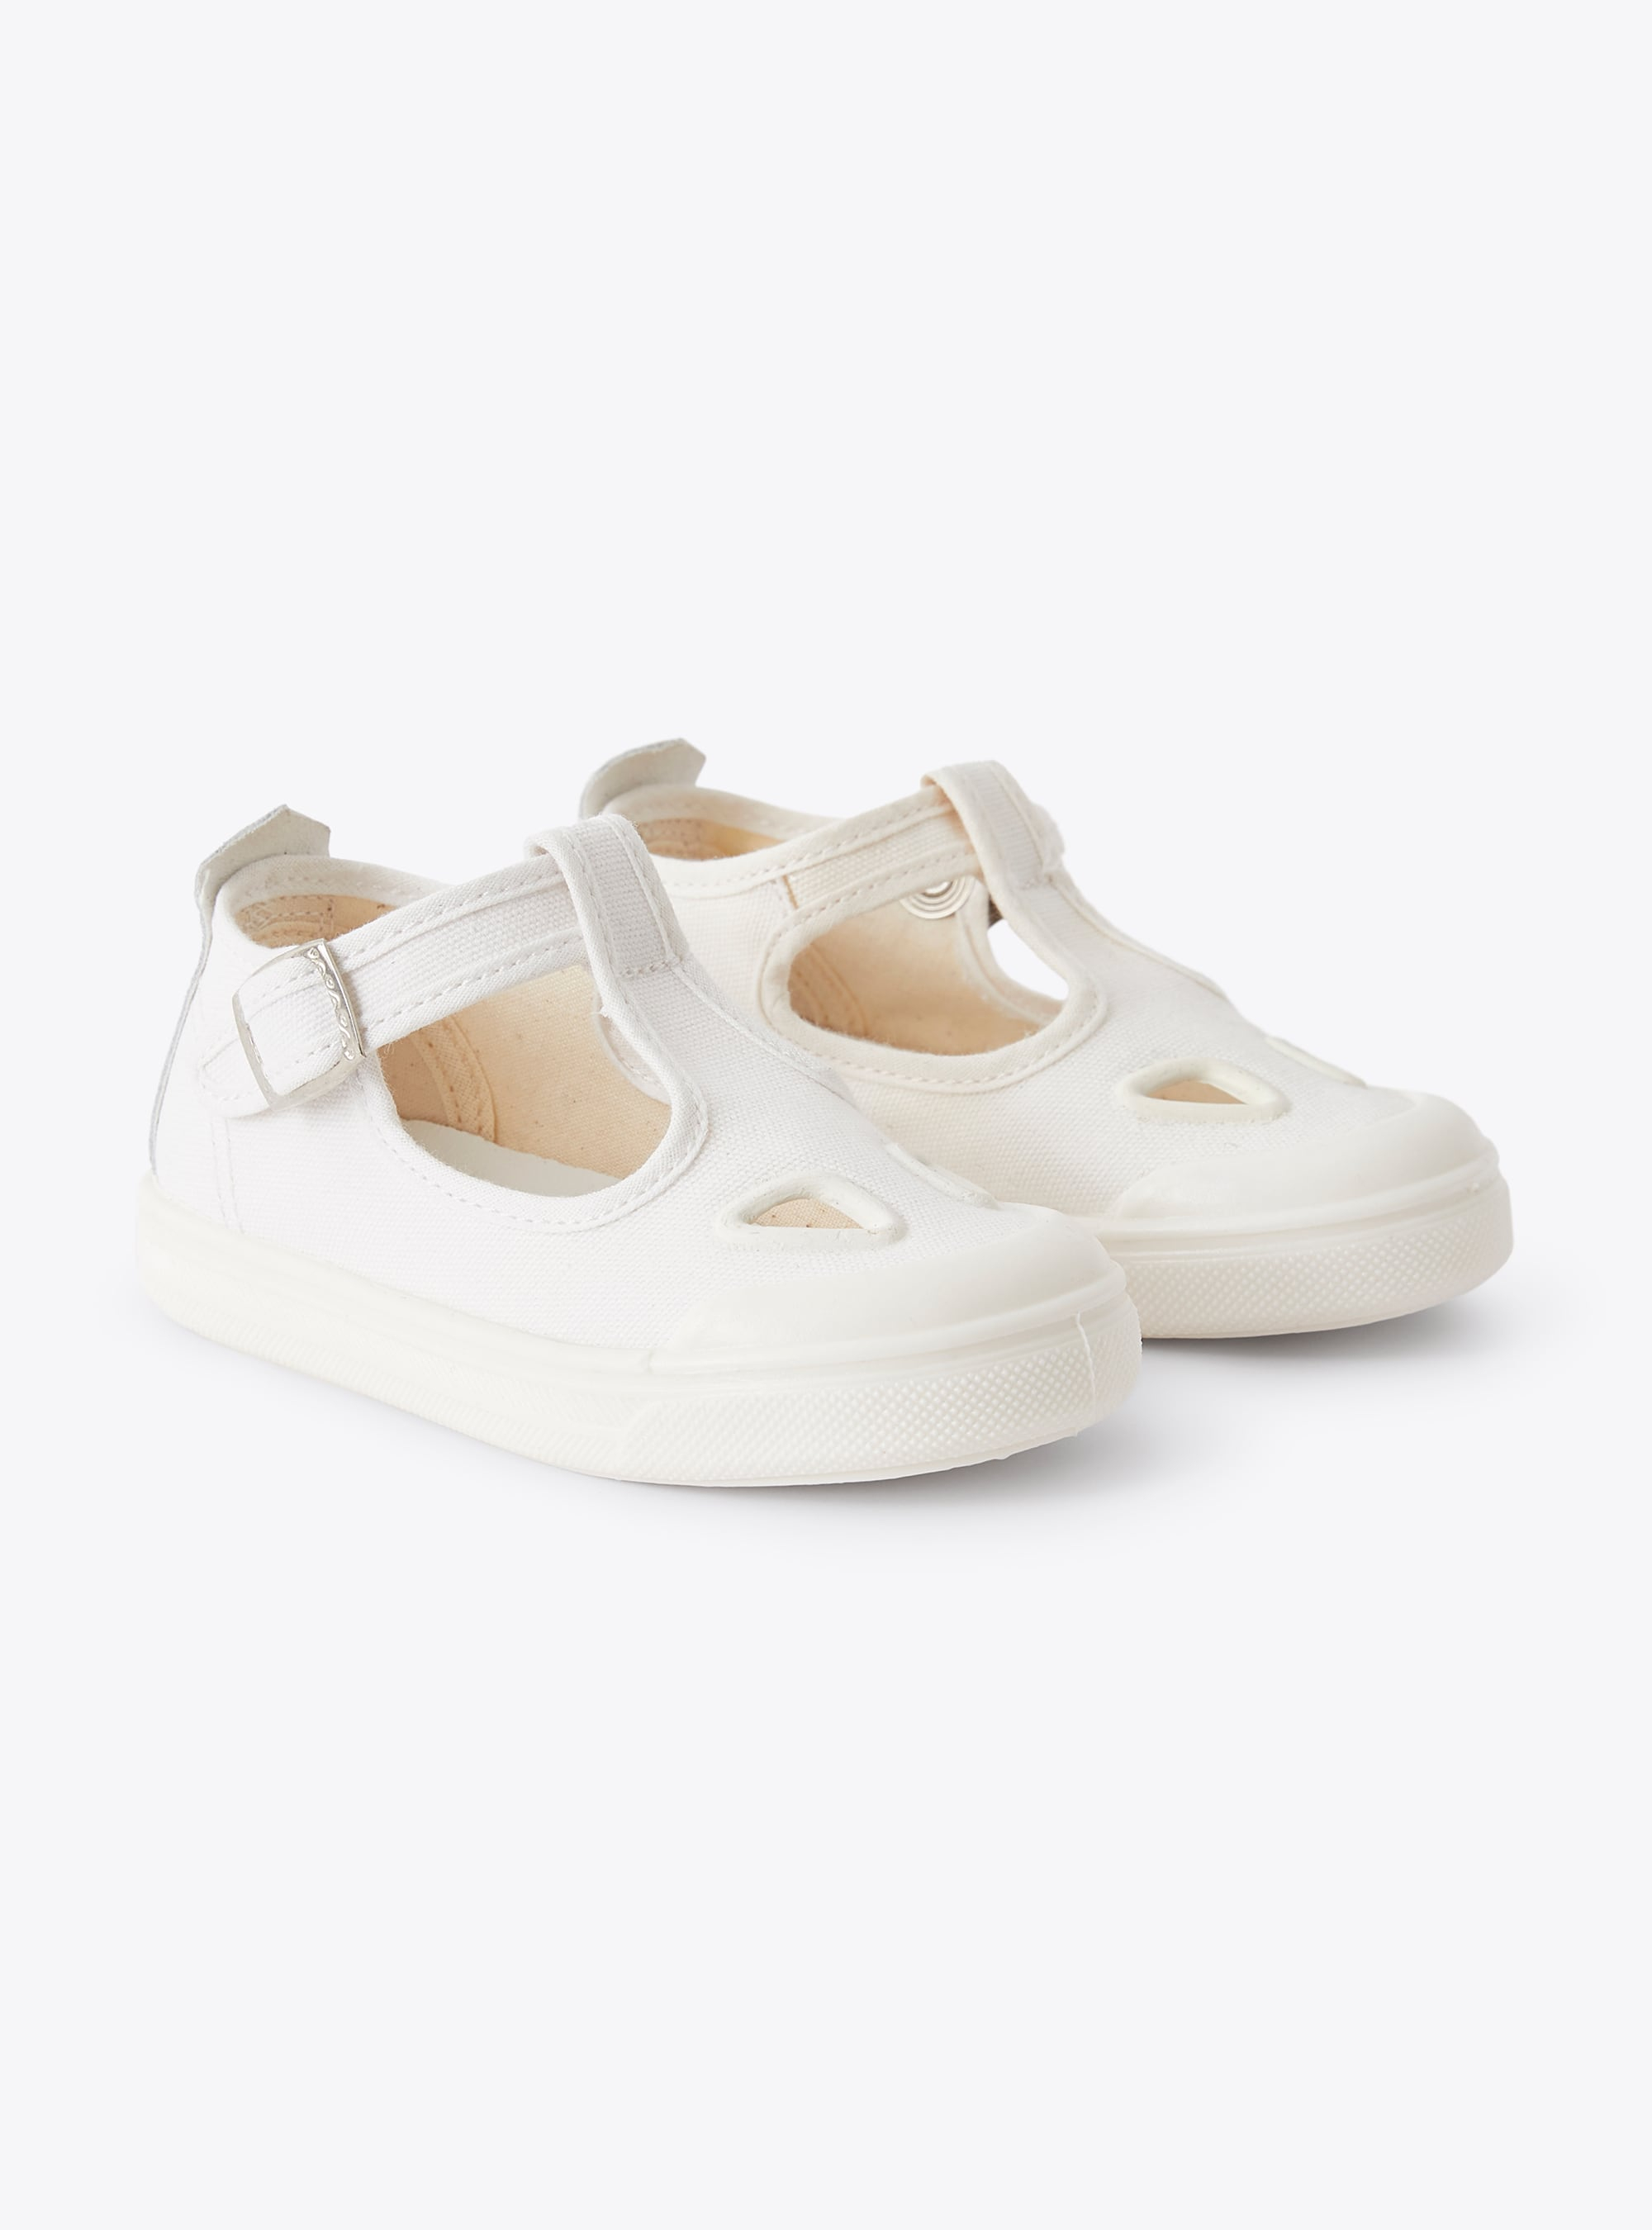 Sandal in white canvas with eyelets - Shoes - Il Gufo